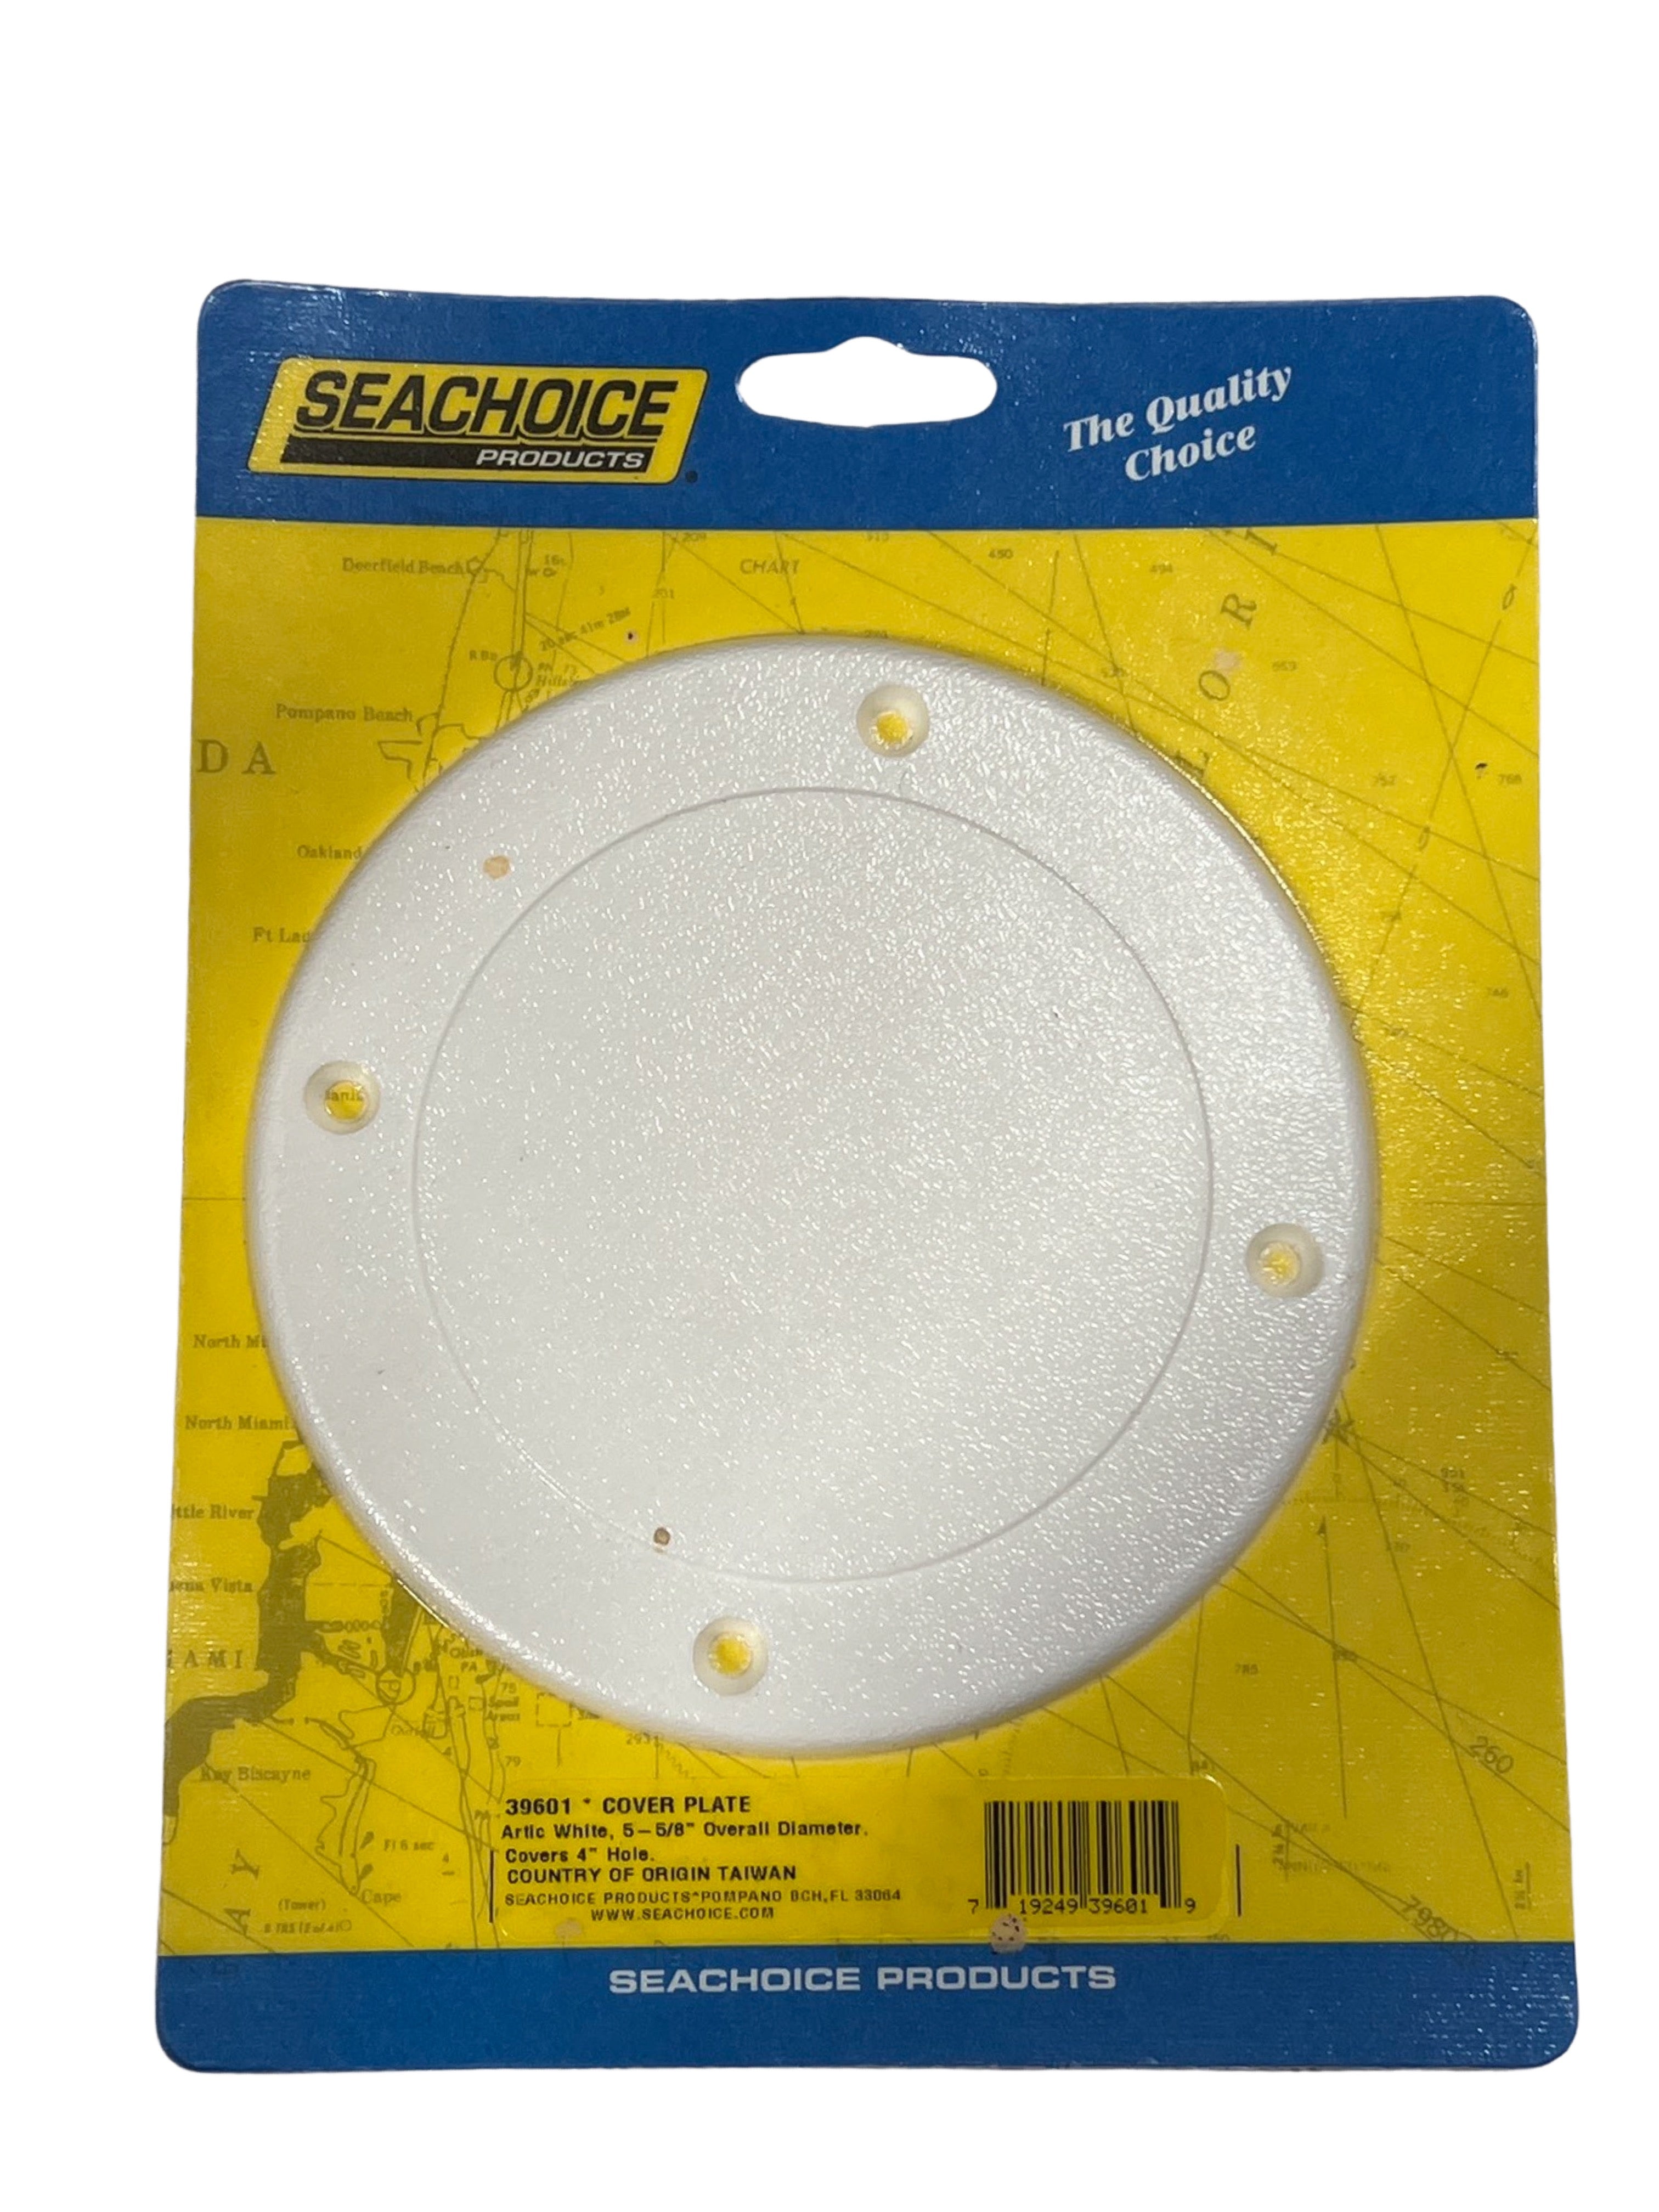 Cover Plate P/N: 39601